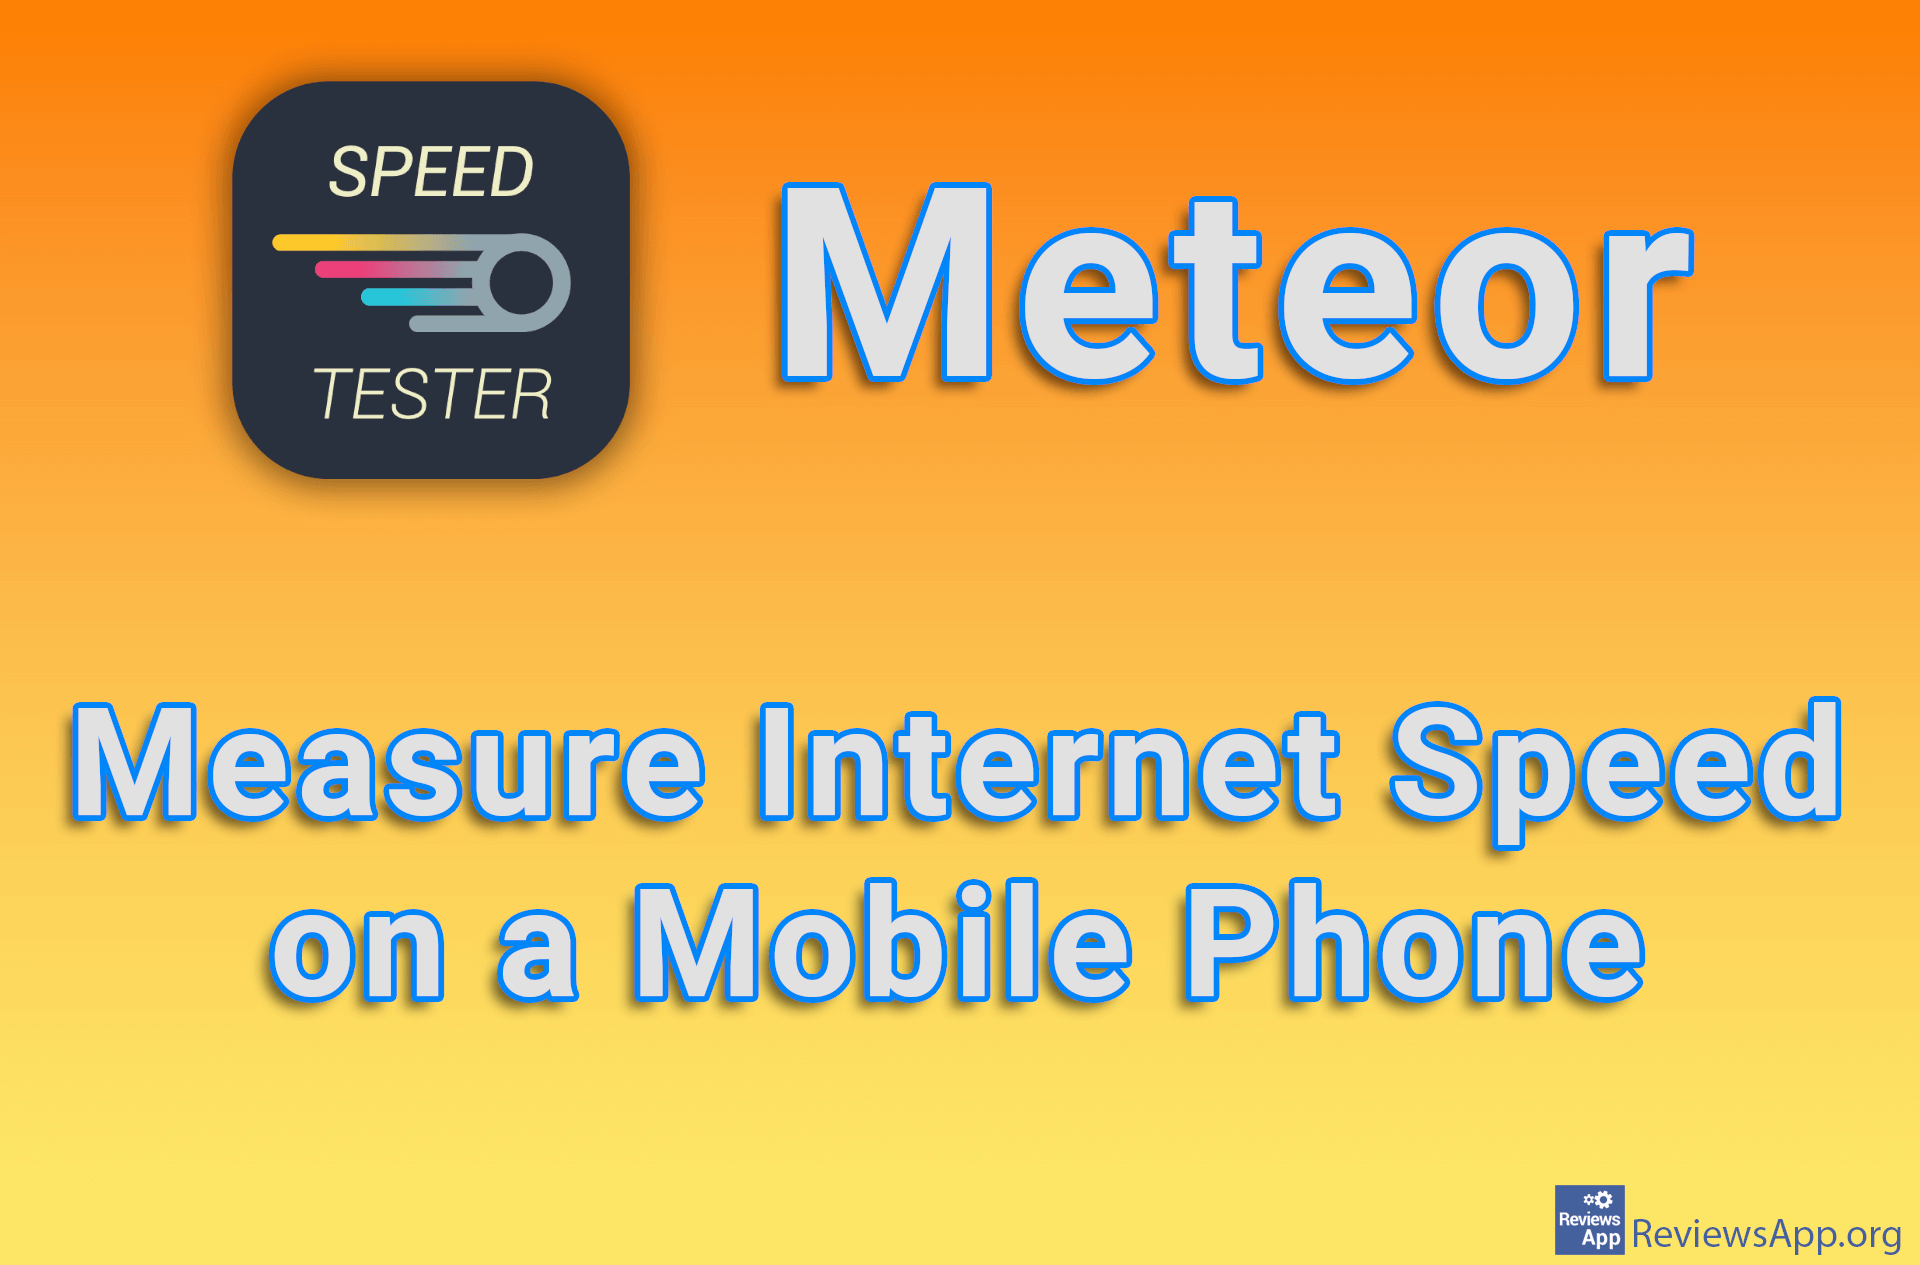 Meteor – Measure Internet Speed on a Mobile Phone